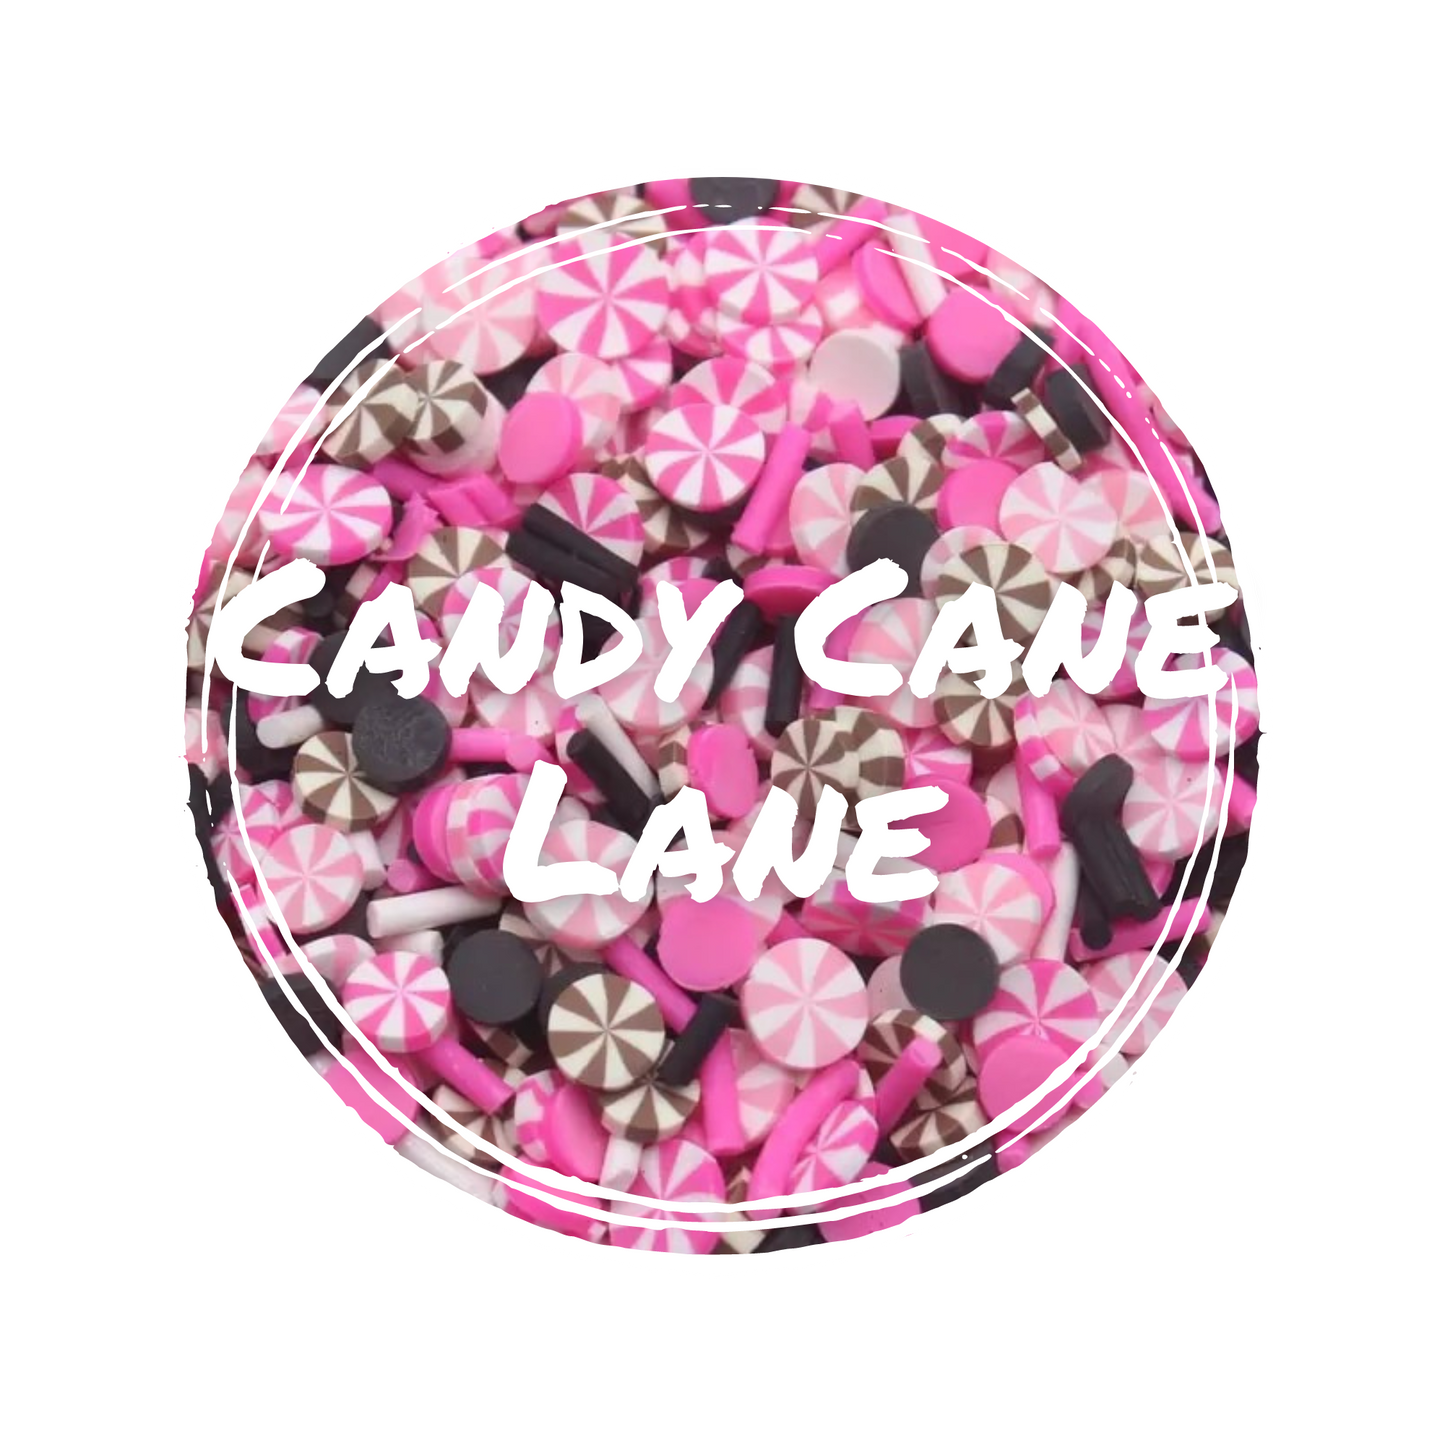 Candy Cane Lane - Polymer Clay slices